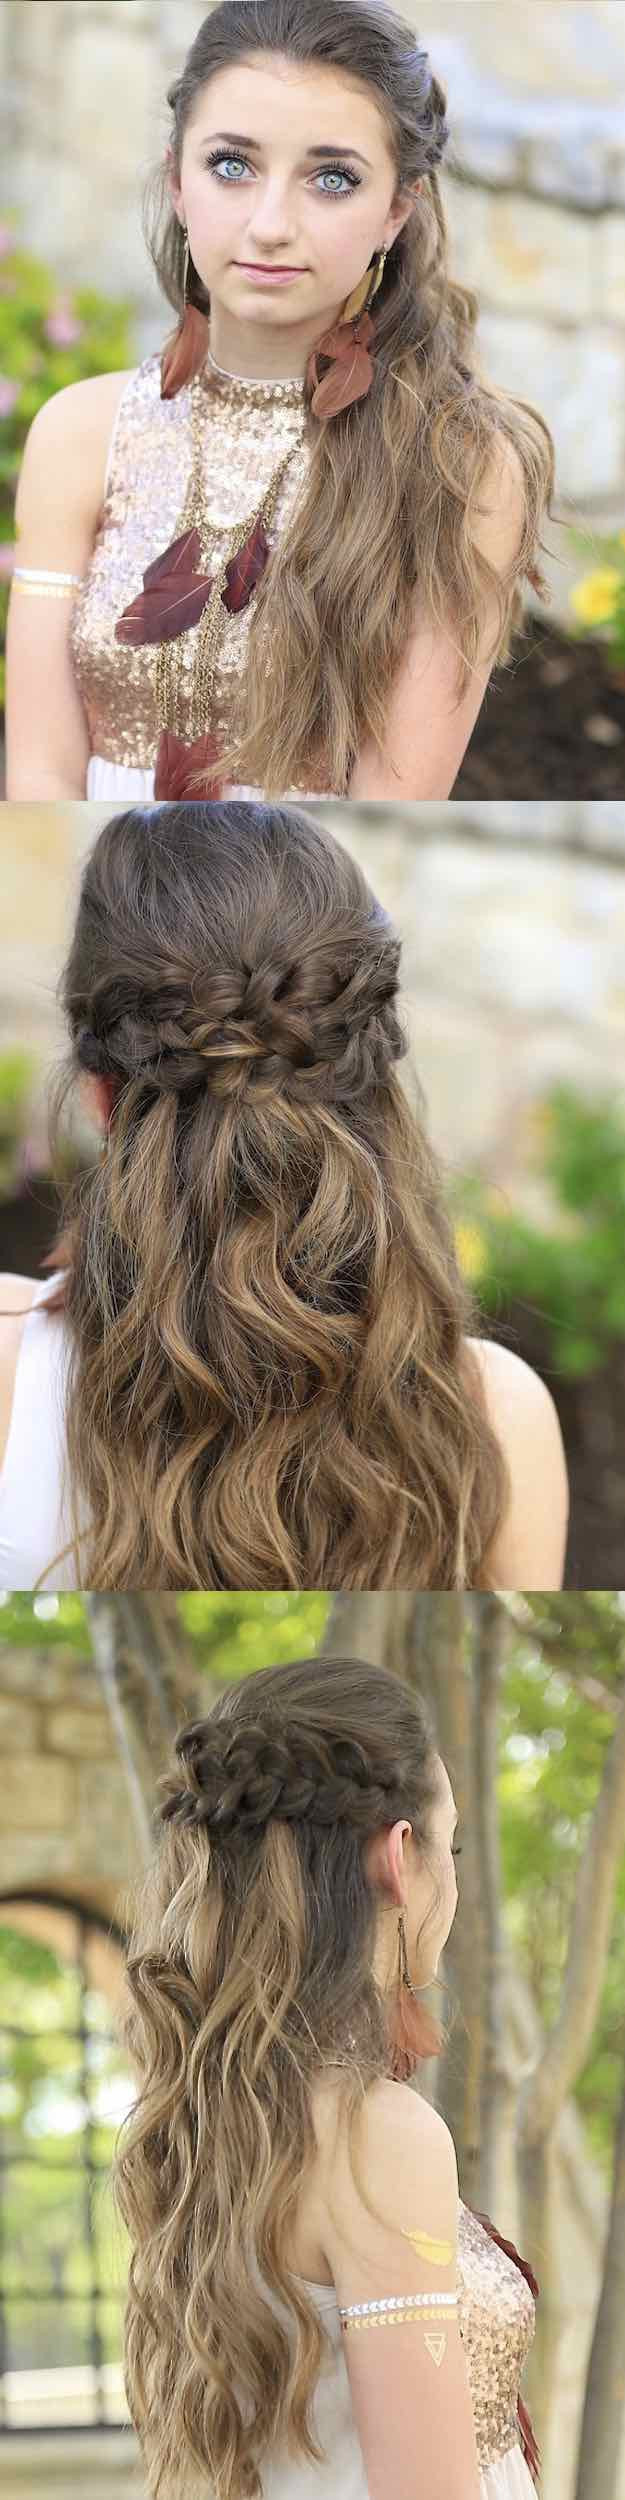 Prom Hairstyle Half Updos
 25 Easy Half Up Half Down Hairstyle Tutorials For Prom